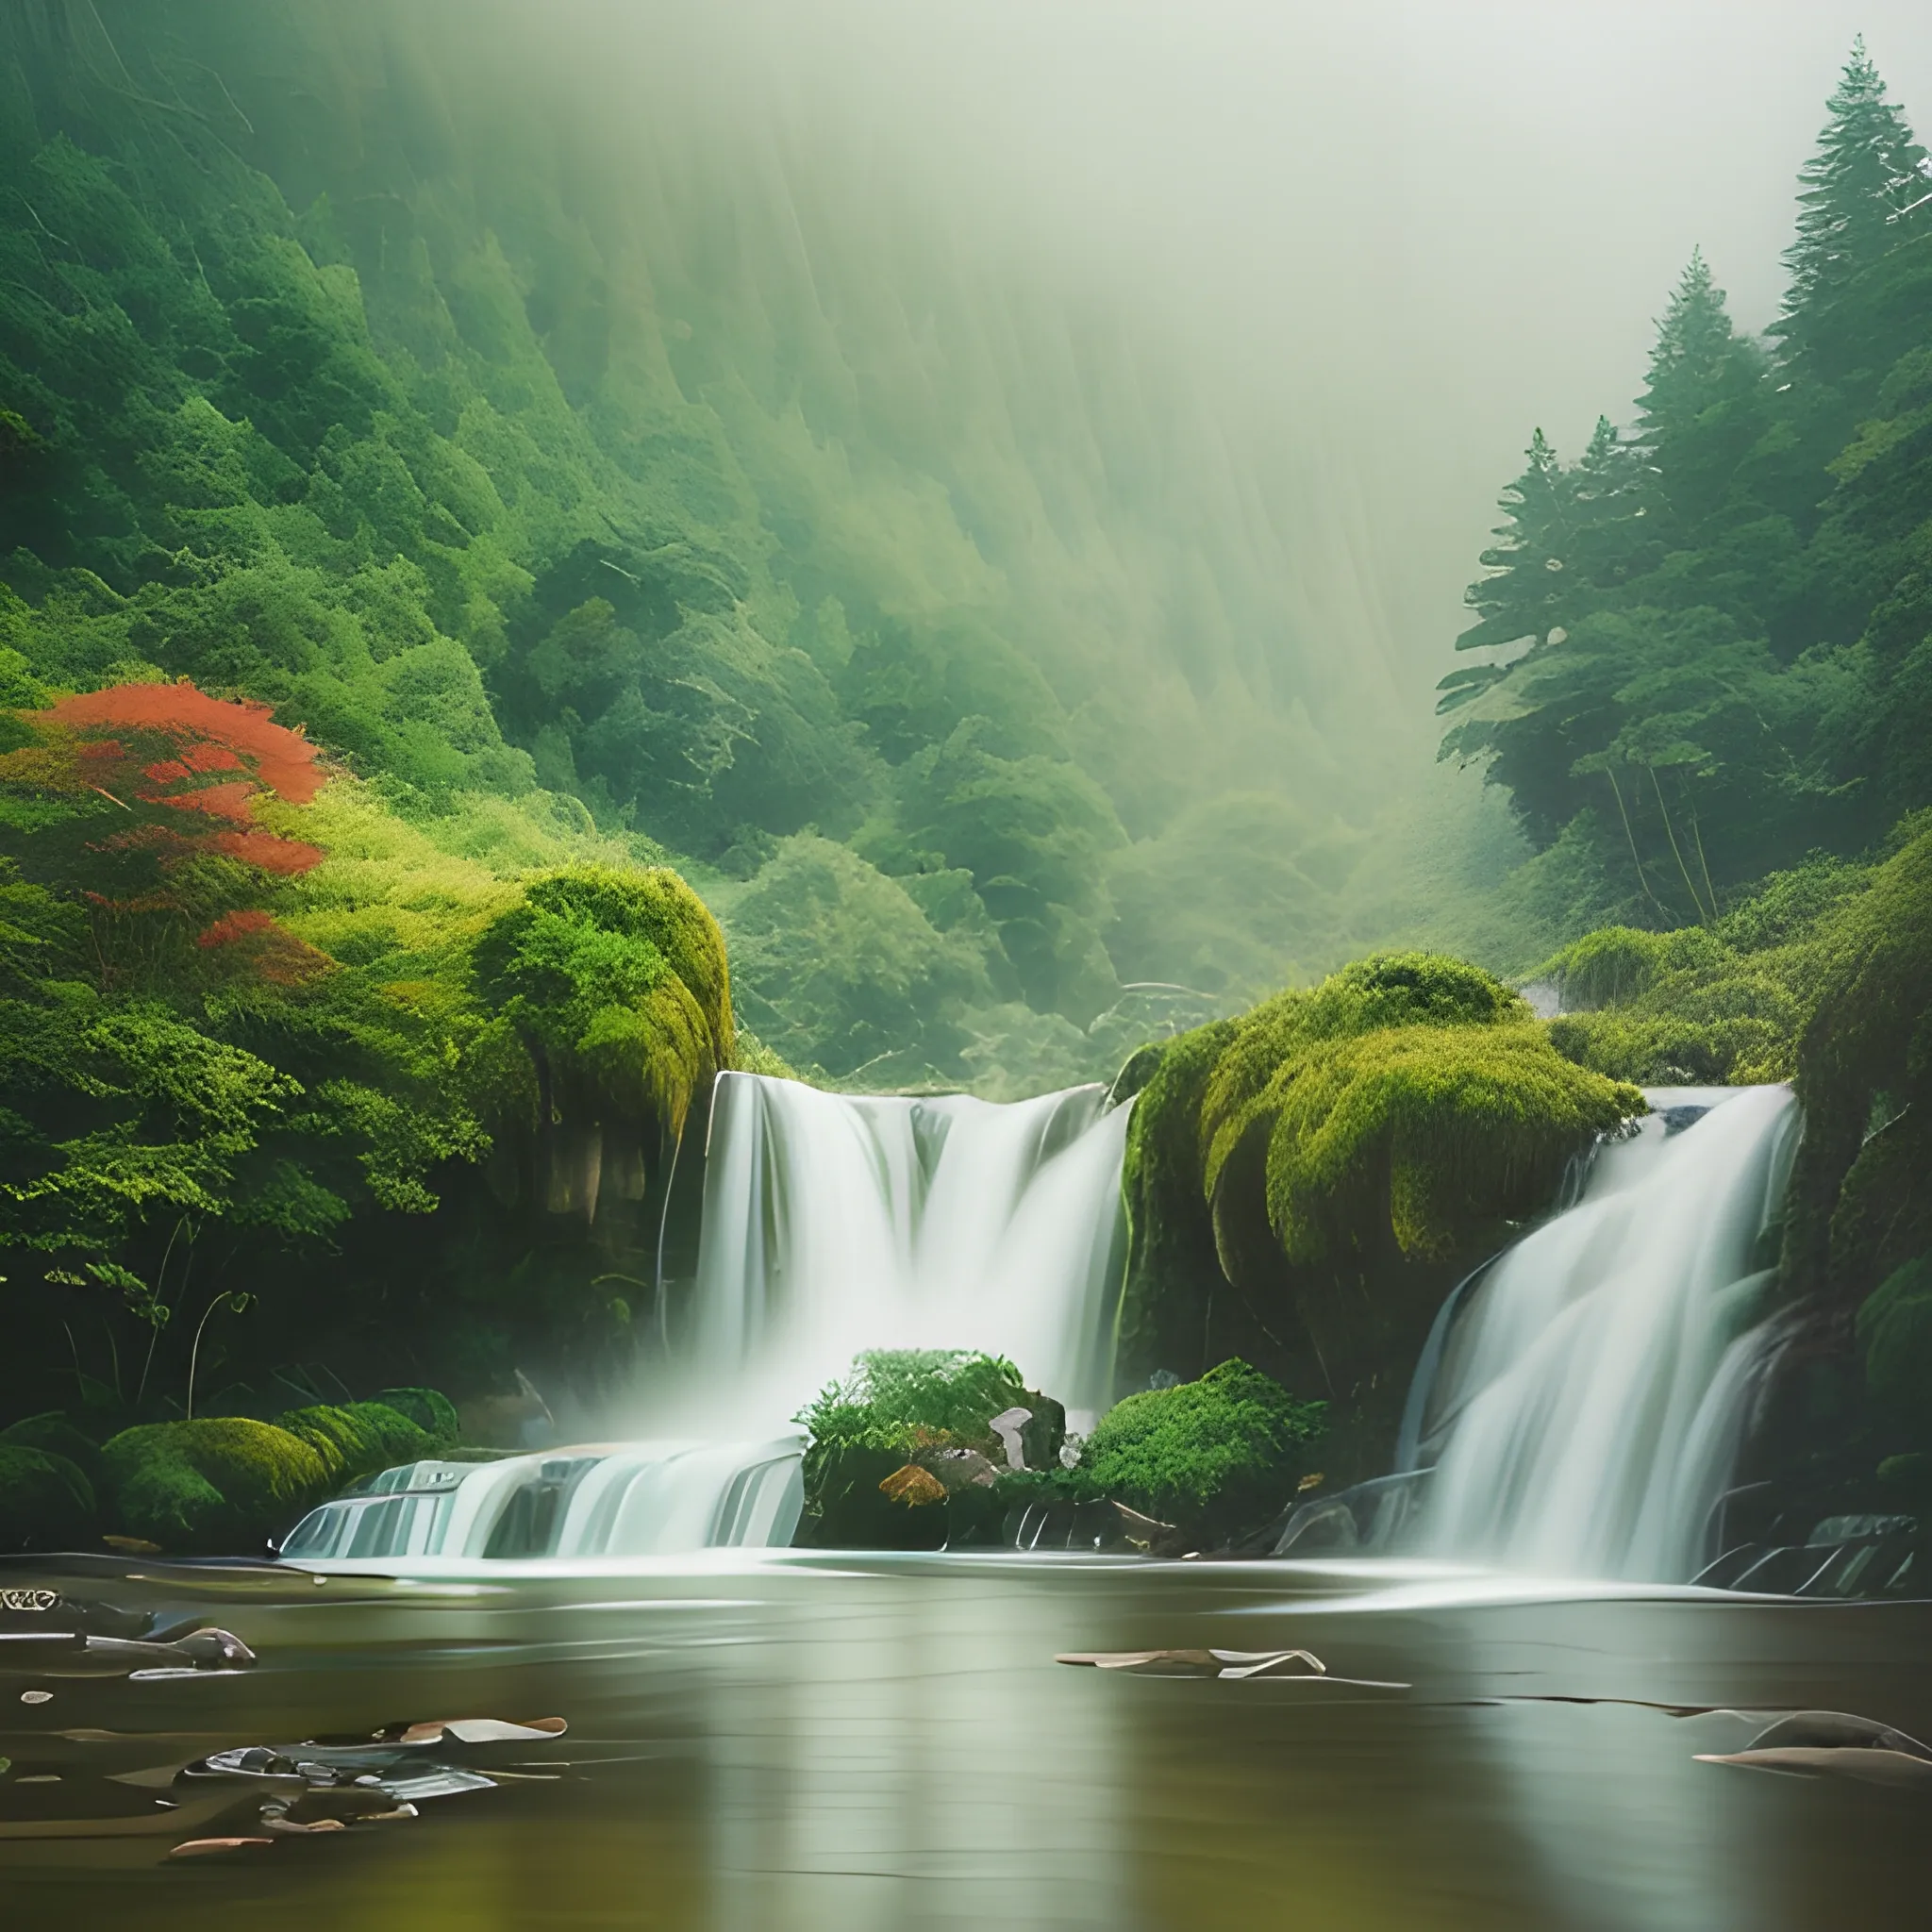 "Captivating and soothing landscapes that evoke a sense of tranquility and peace, gentle colors, serene natural settings, soft morning light, misty mountains, calming waterfalls, lush greenery, a moment of serenity captured in a photograph."